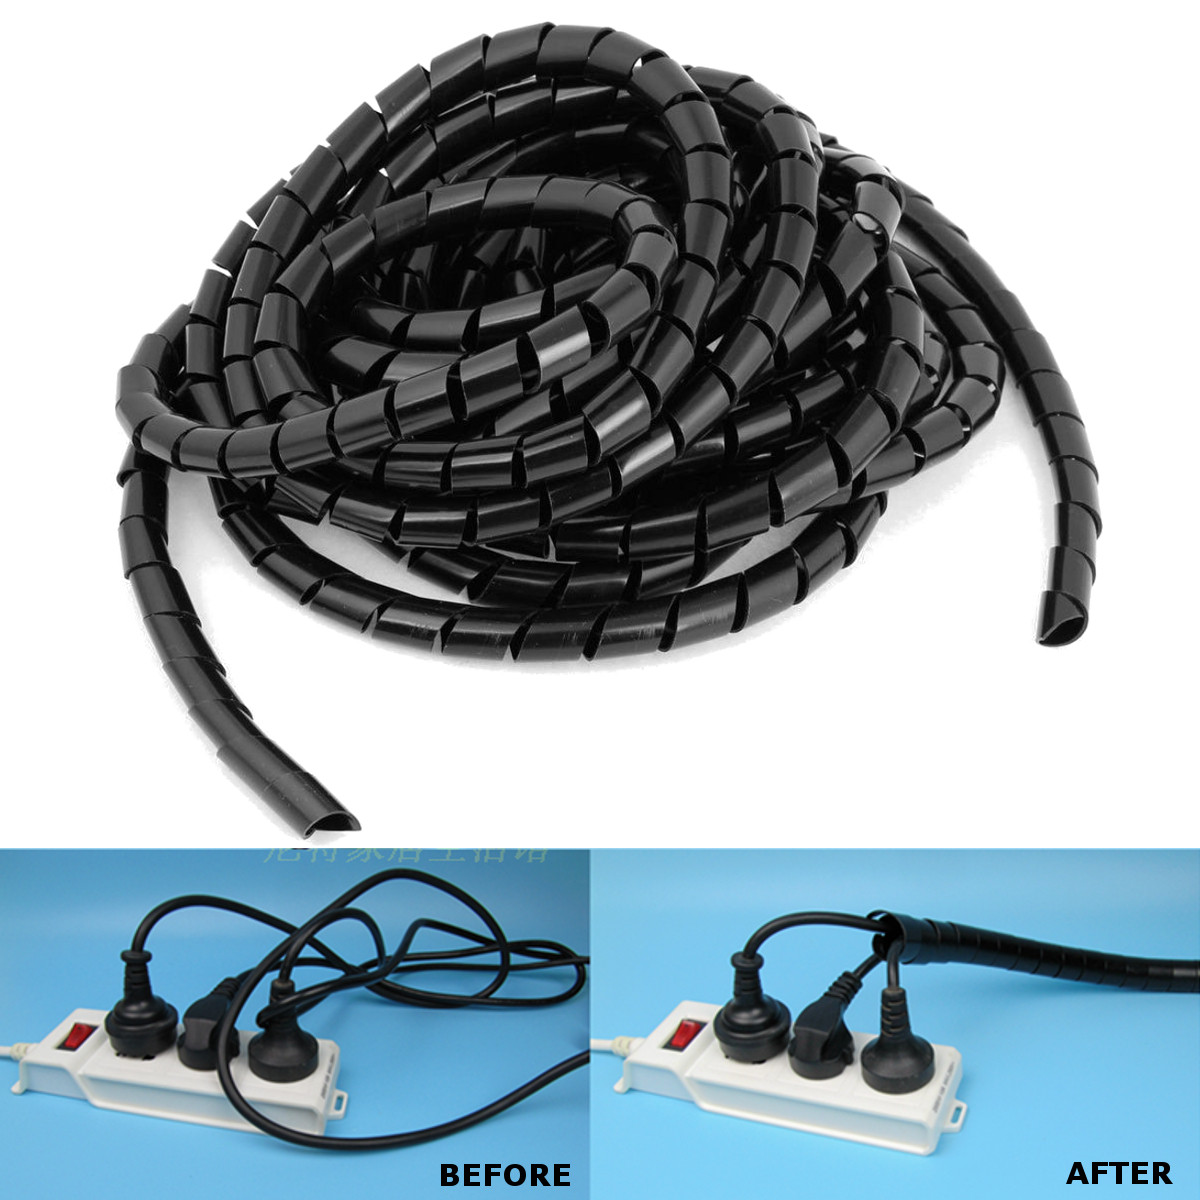 Black-Spiral-Polyethylene-Cable-Electrical-Wire-Wrap-Tube-Computer-Manage-Cord-1089427-2